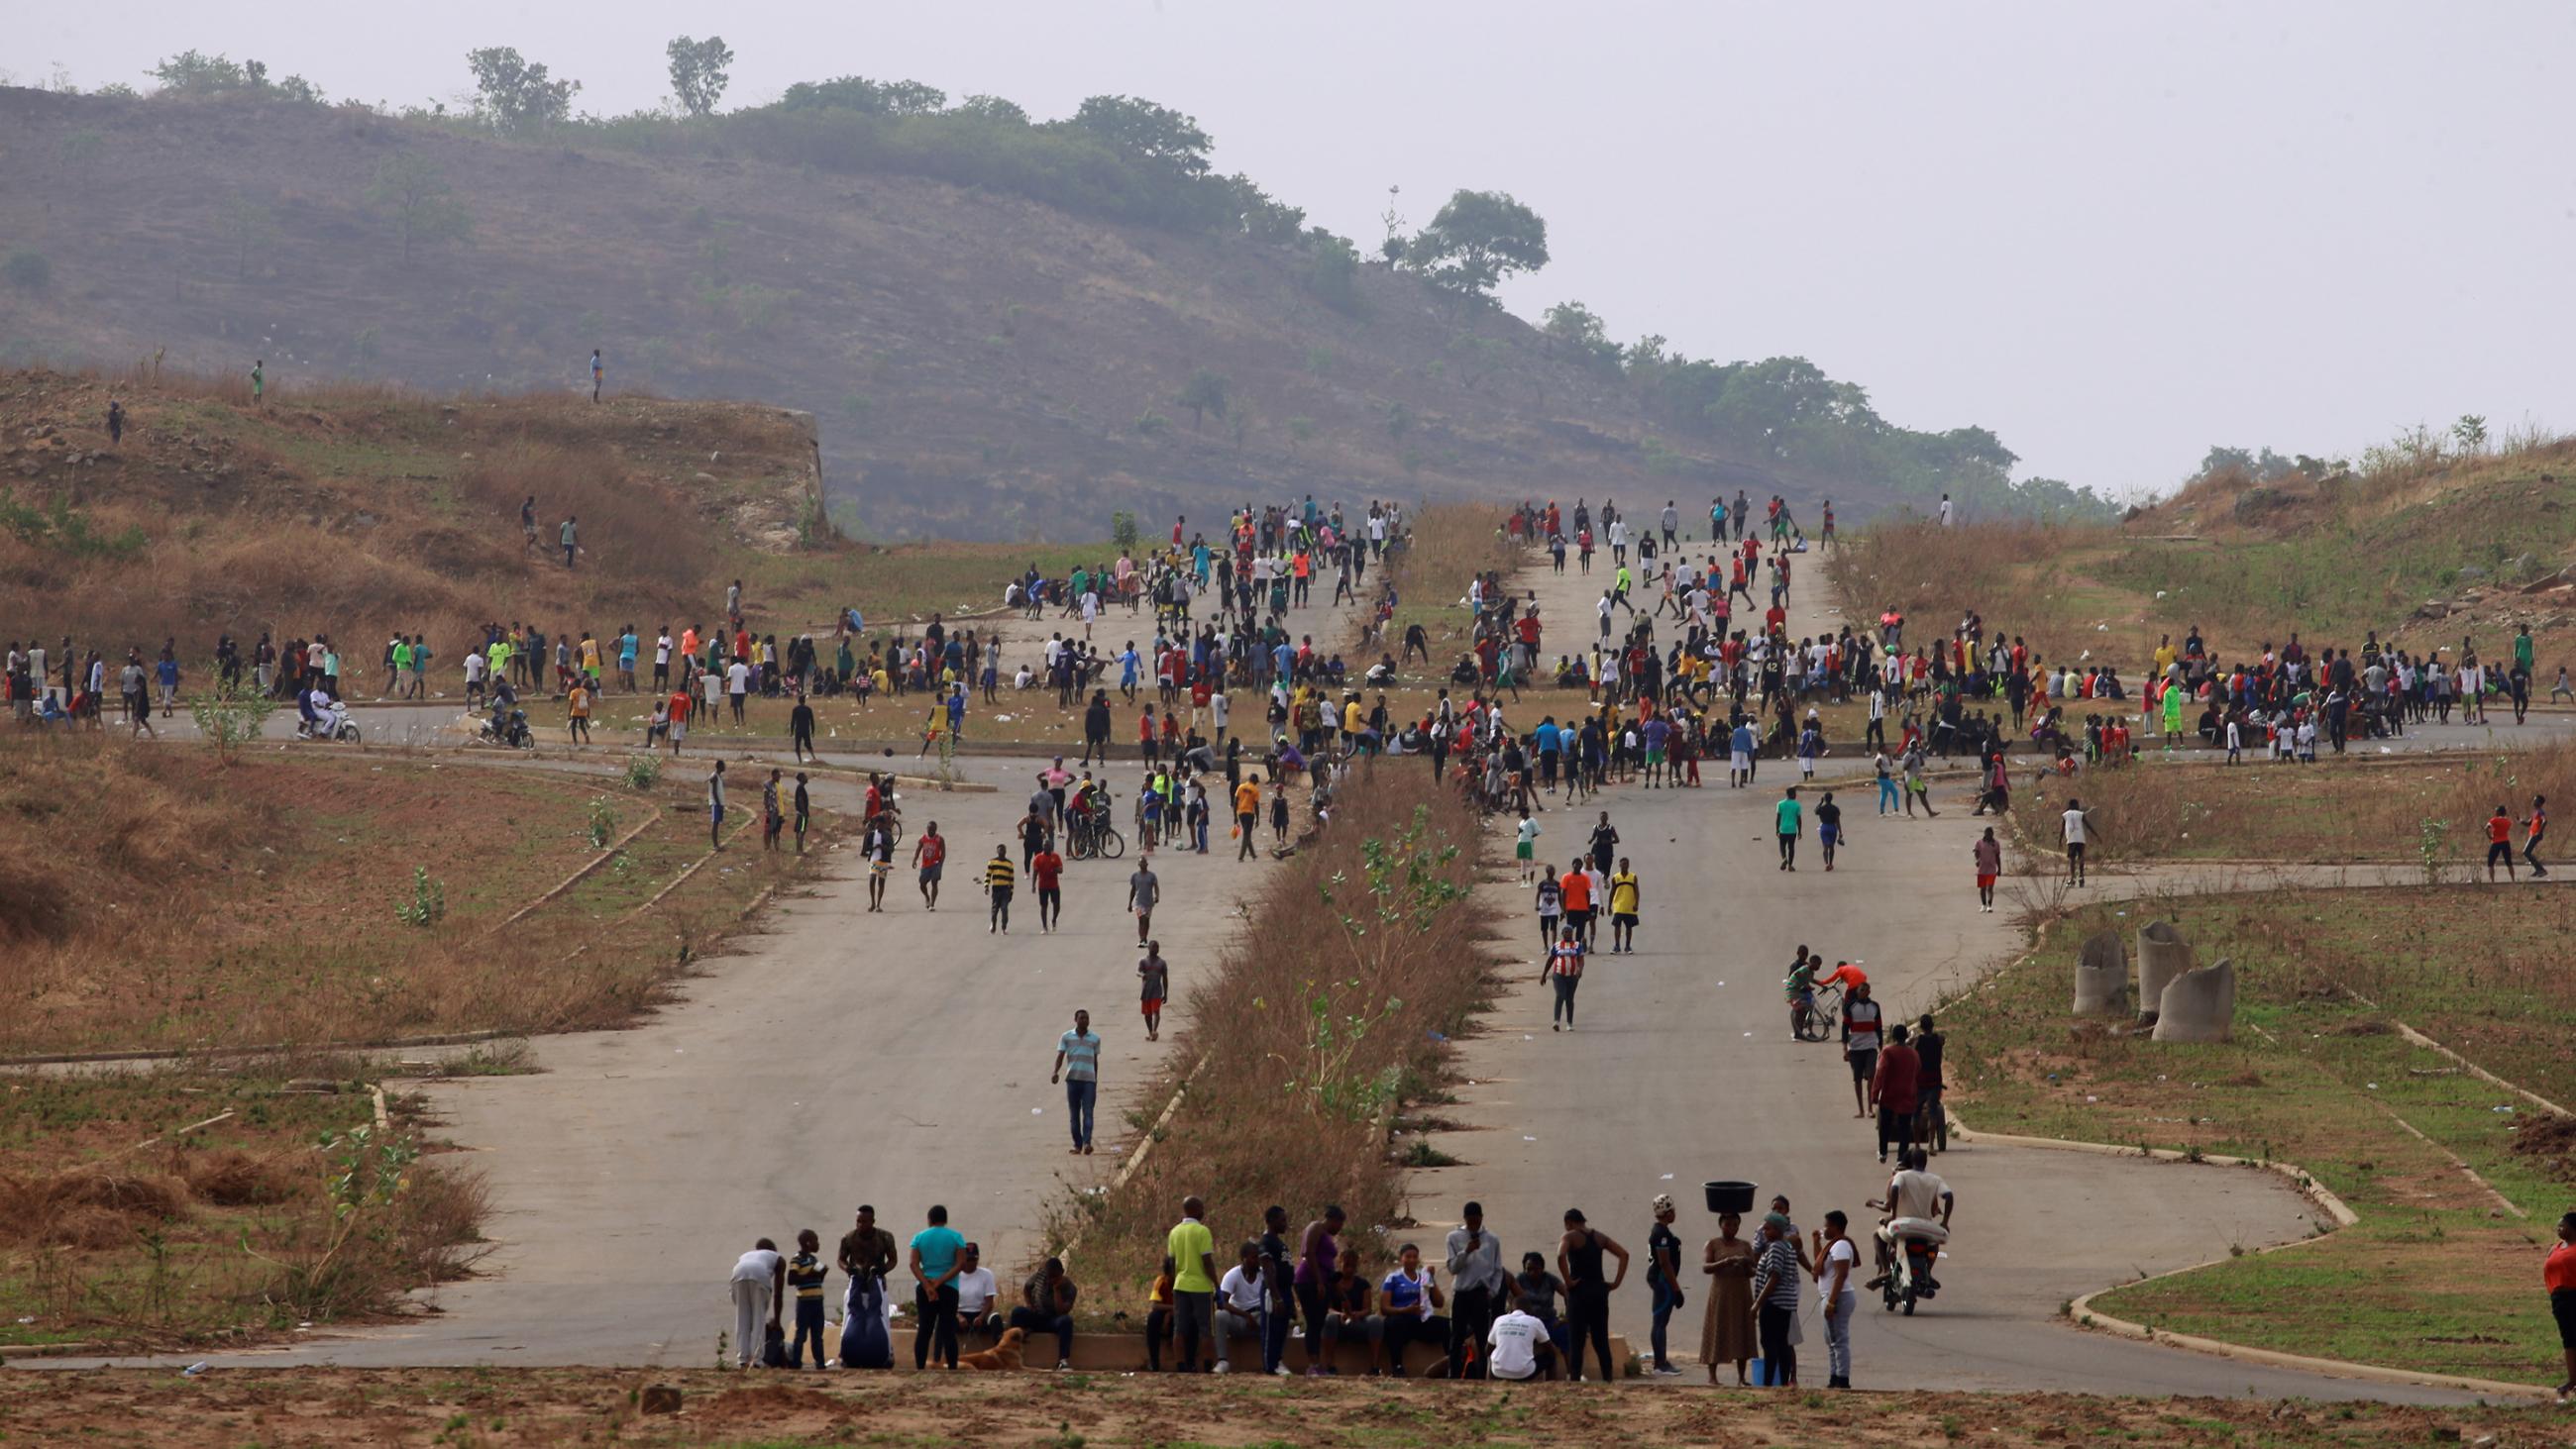 This photo shows a large crossroads from a distance that is filled with people. 